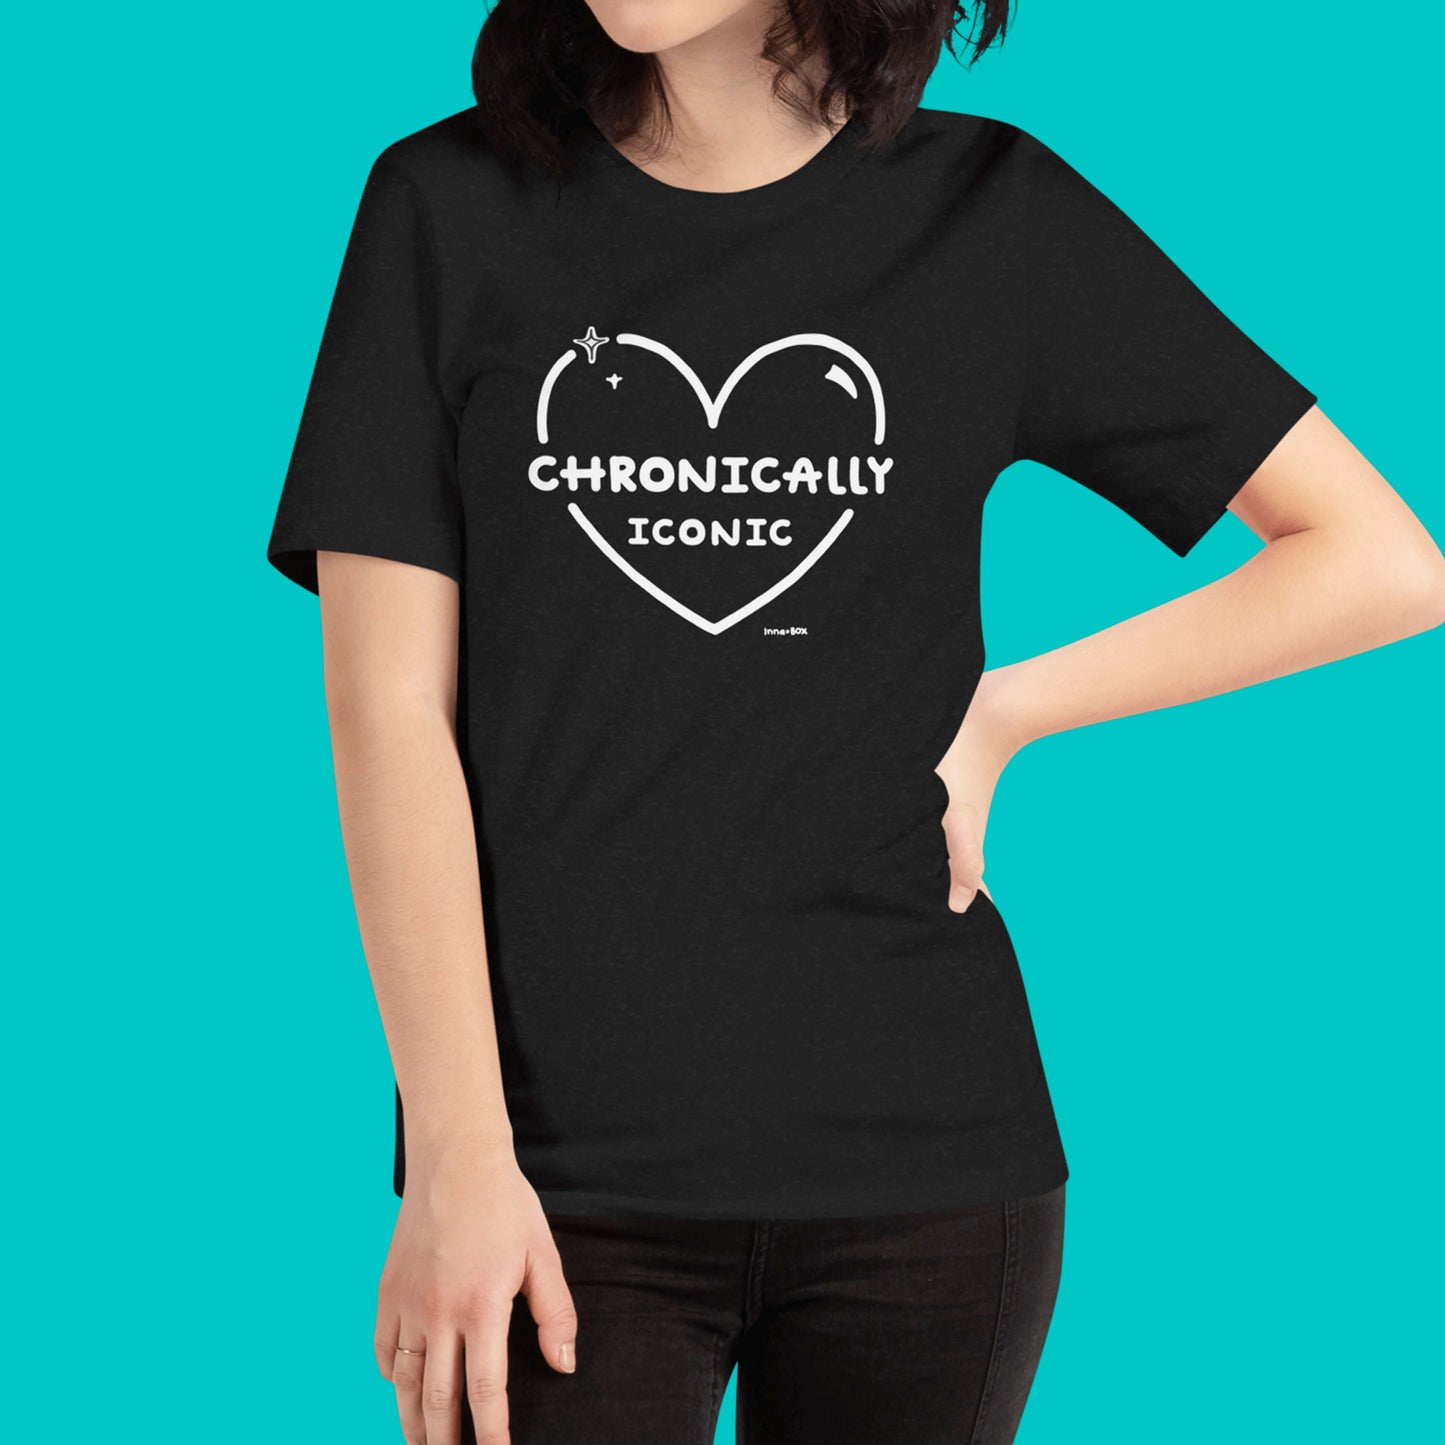 The Chronically Iconic black tee worn by a model with brown short hair on a blue background. The short sleeve t-shirt features a white heart outline with sparkles and centre text reading 'chronically iconic' with the innabox logo underneath. The design is raising awareness for chronic illness and invisible illness.